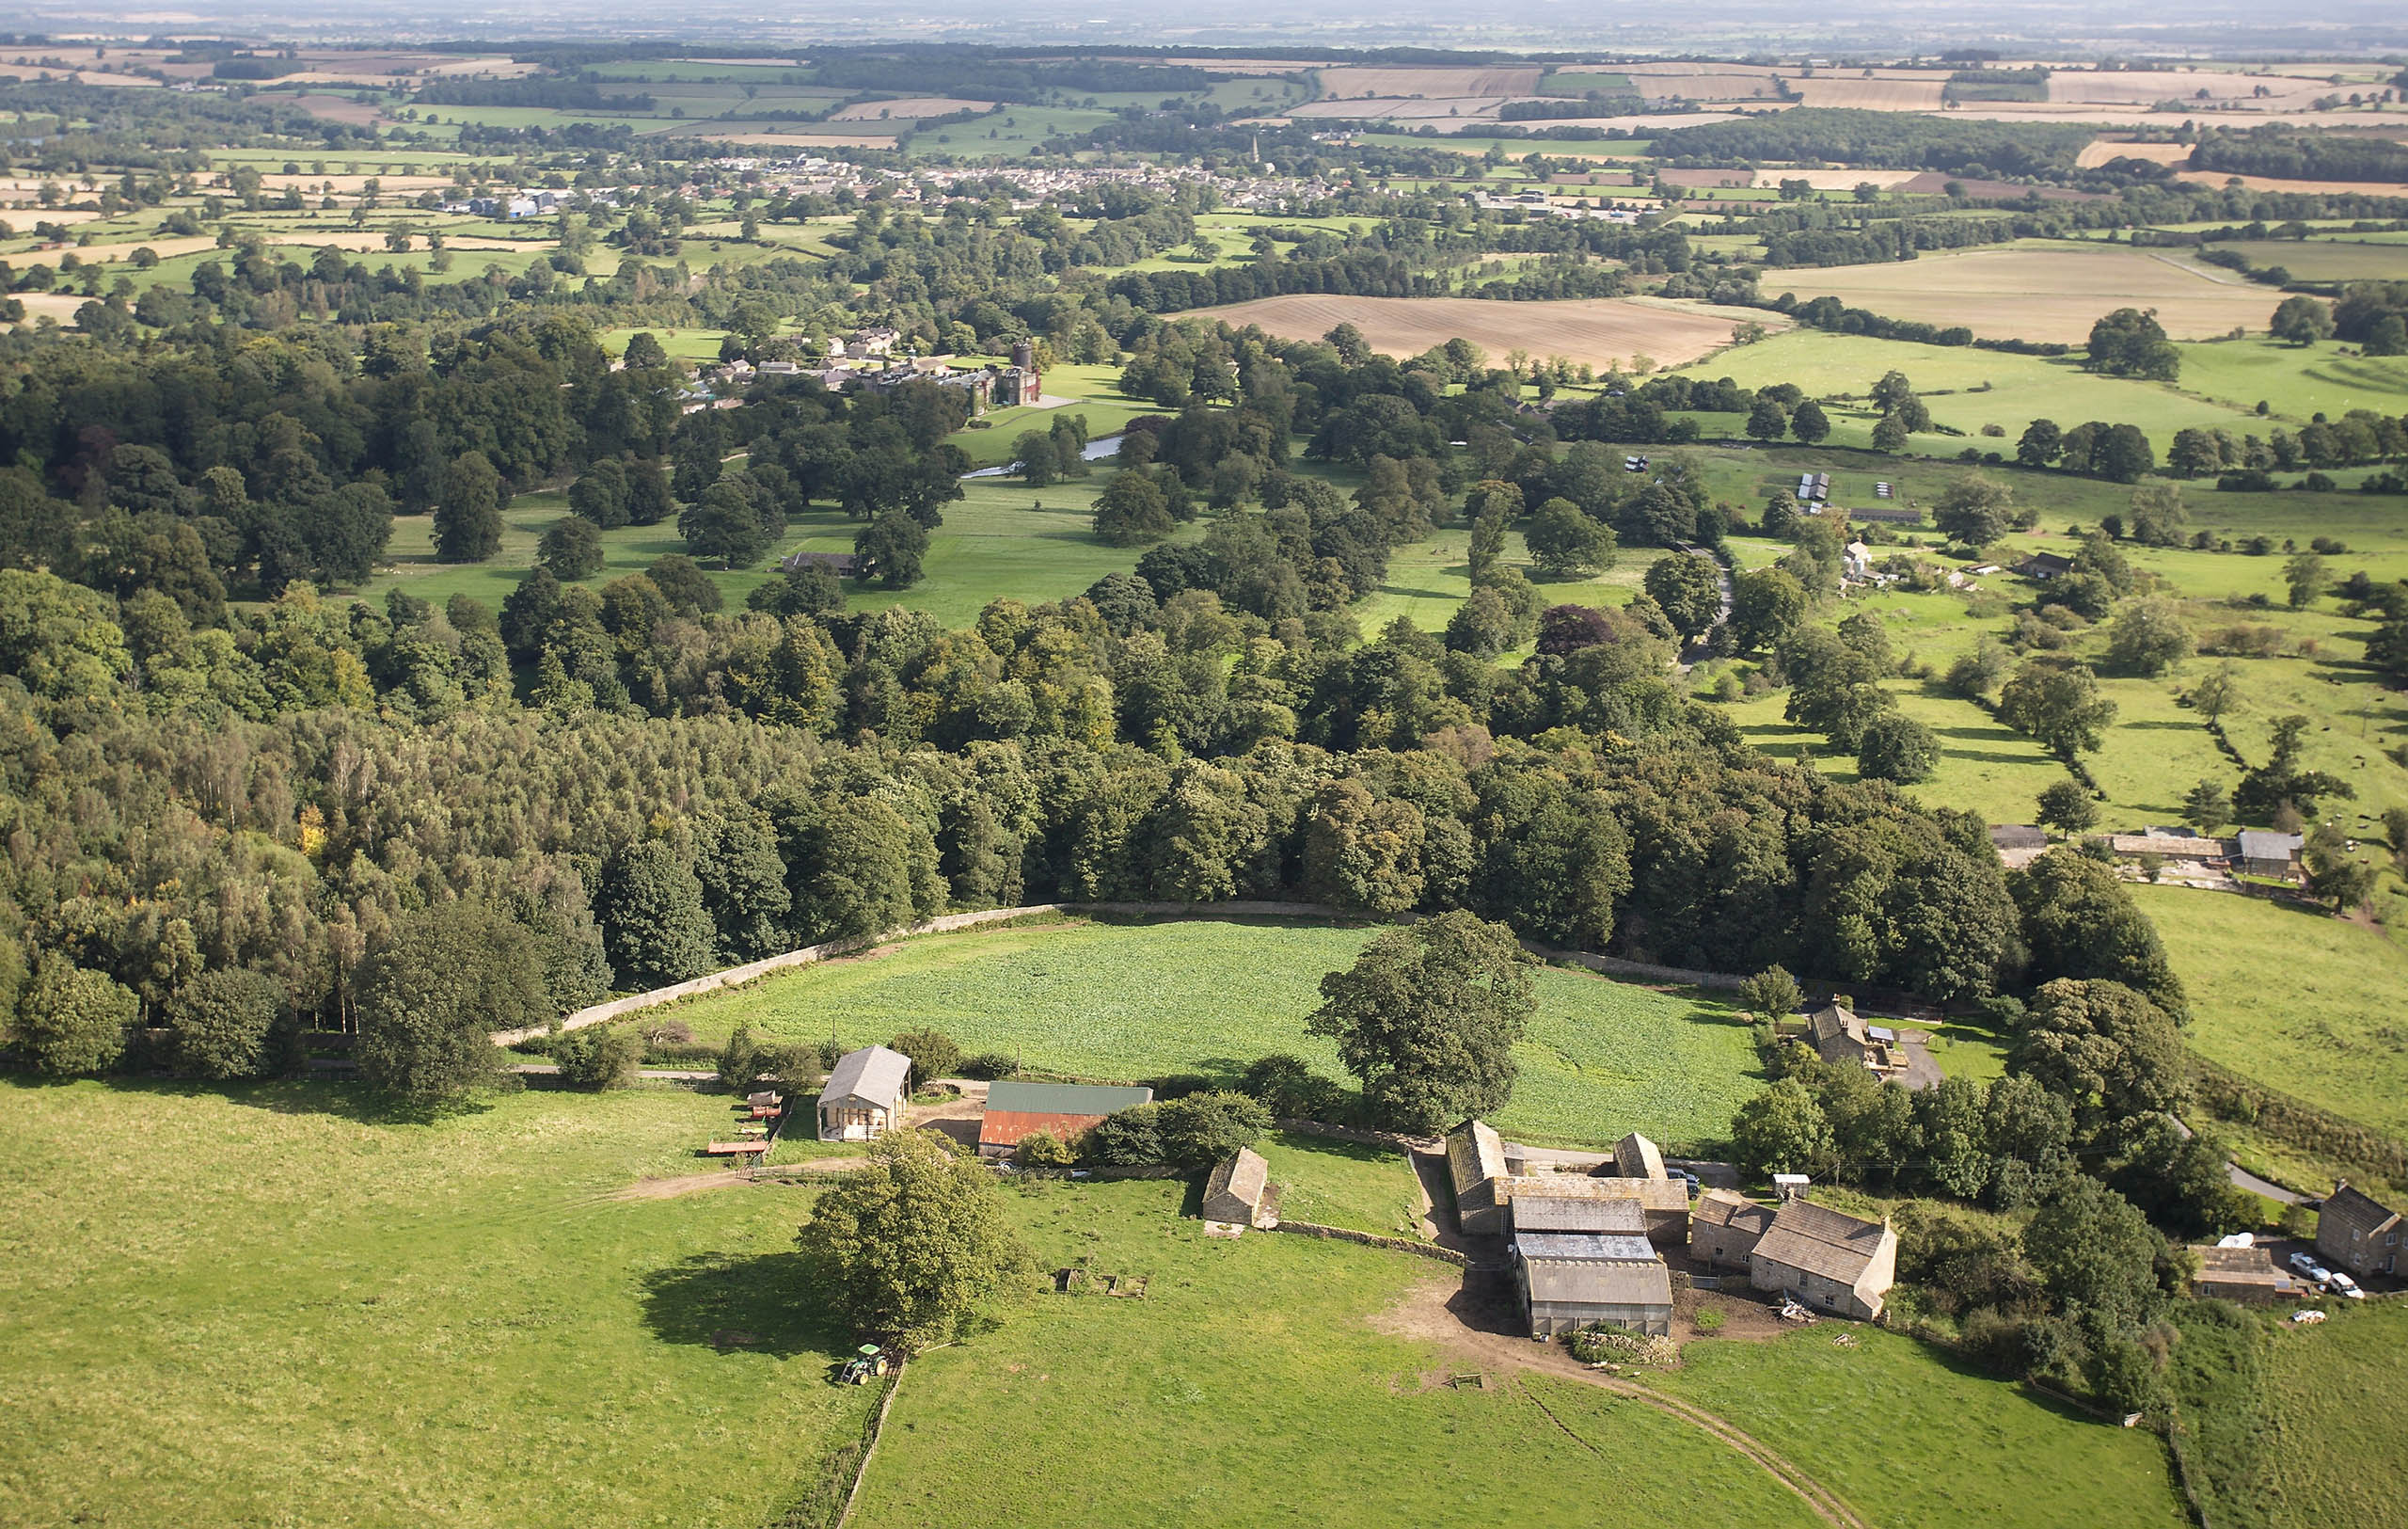 Aerial photo of fields and woodland landscape on the Swinton Estate in North Yorkshre